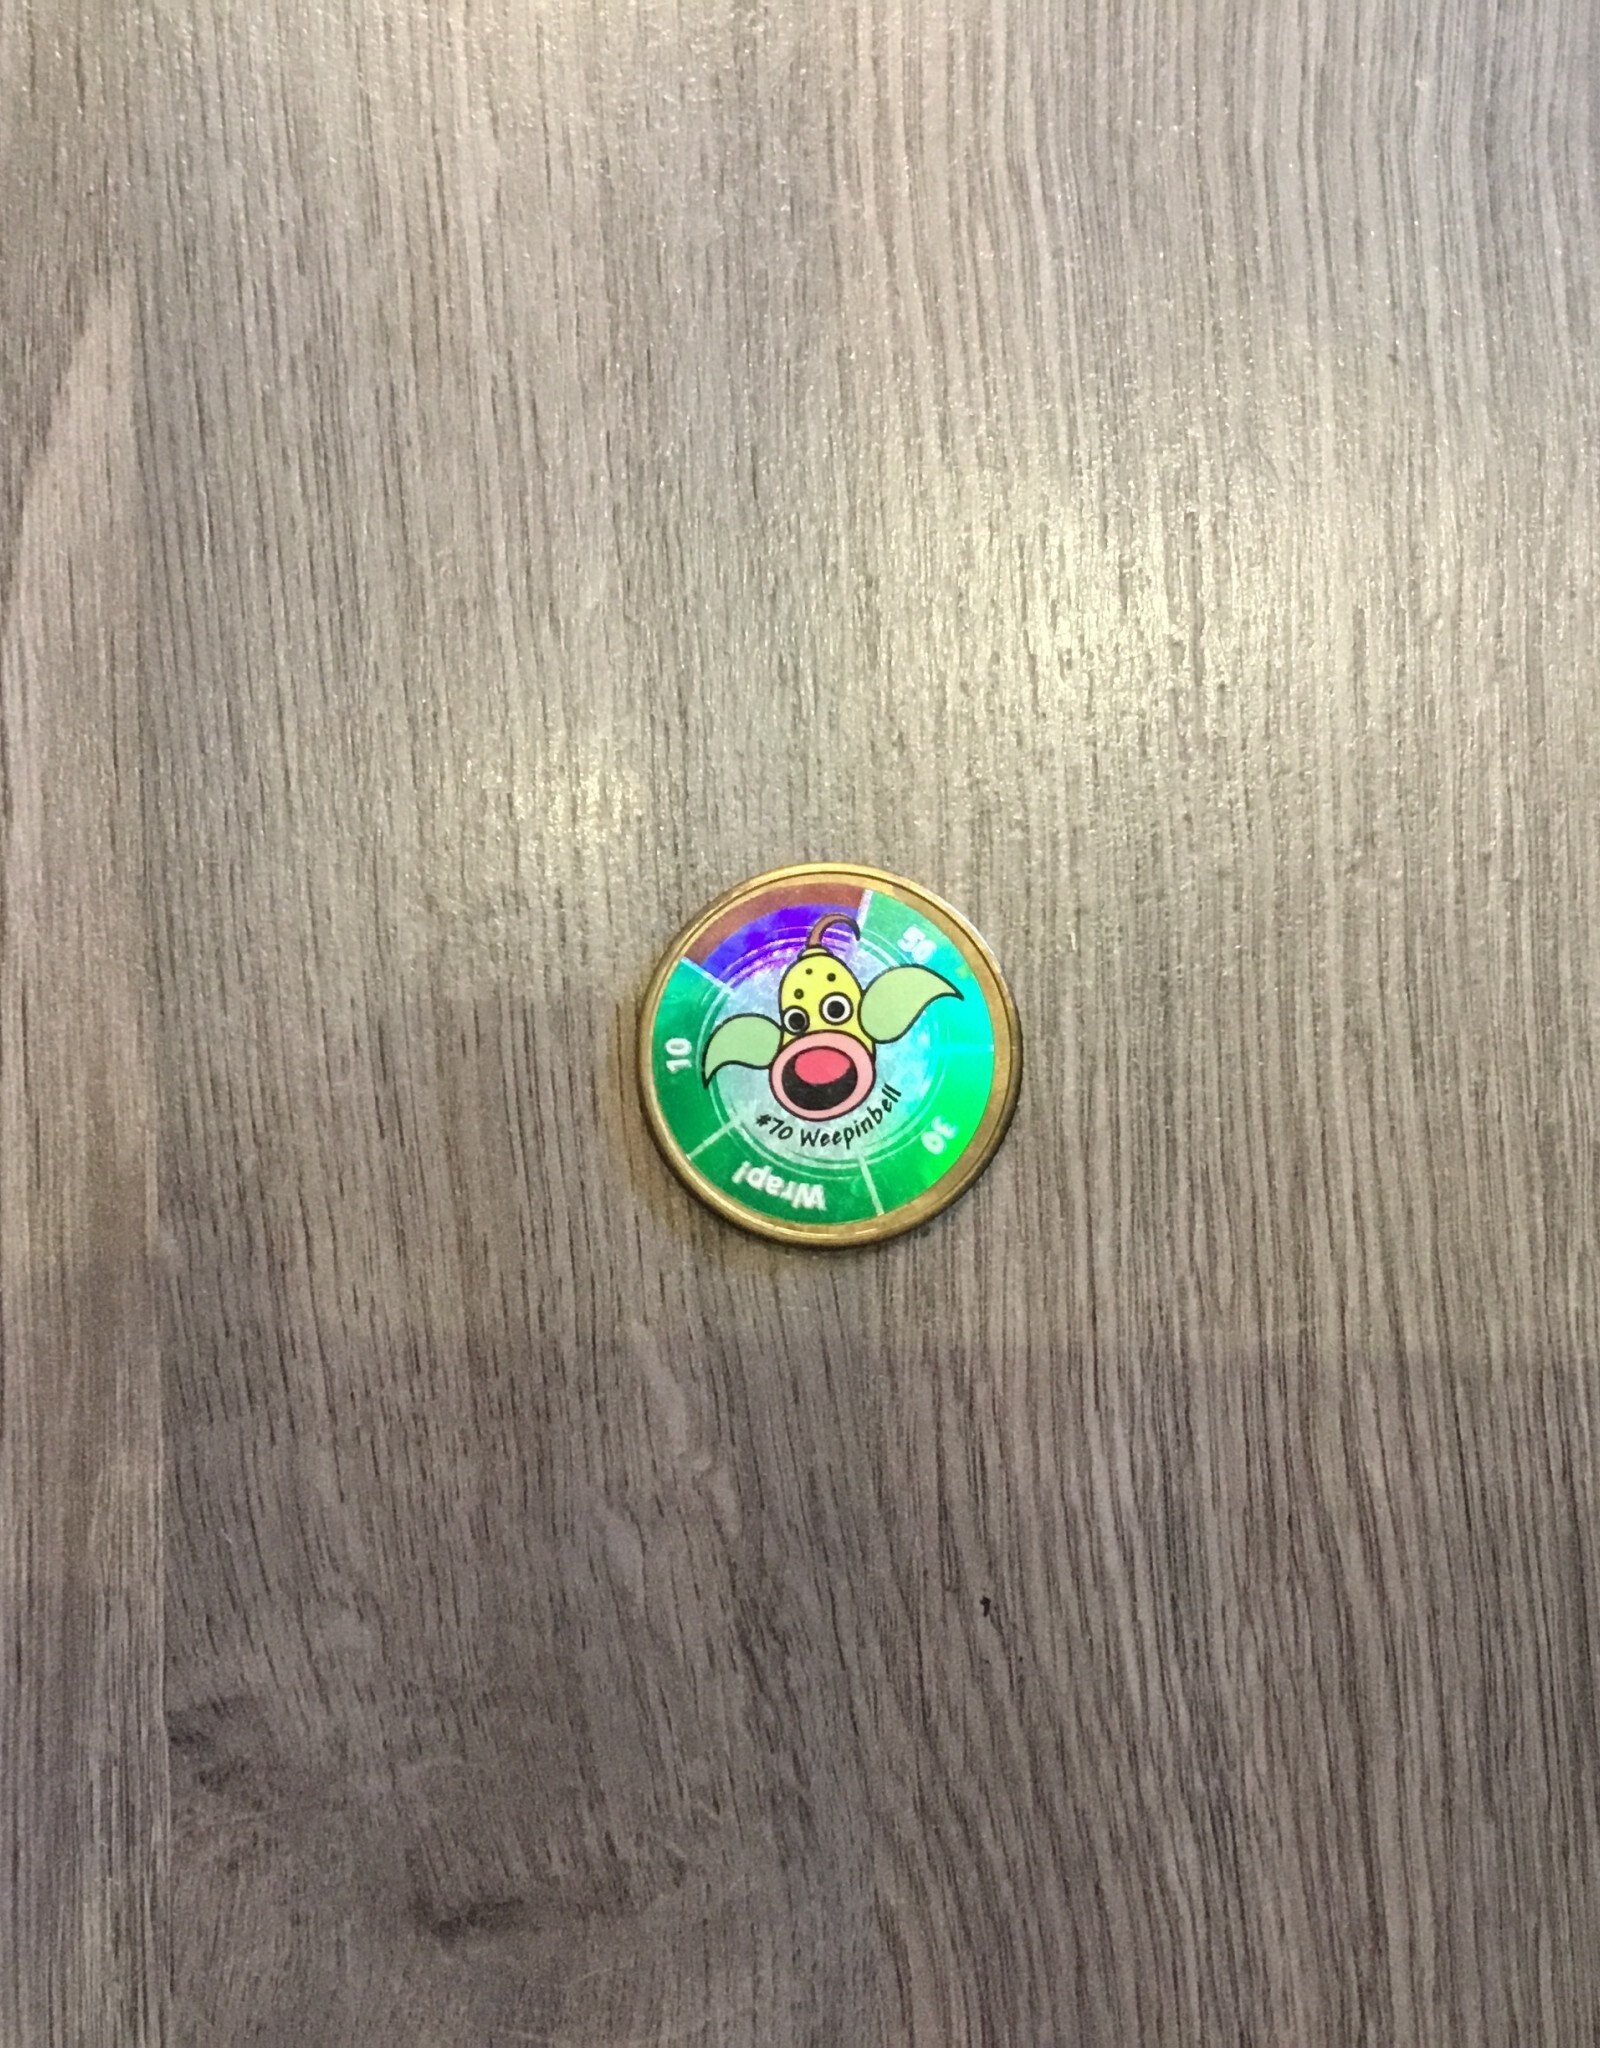 Trading Cards Pokémon Coin #70 Weepinbell